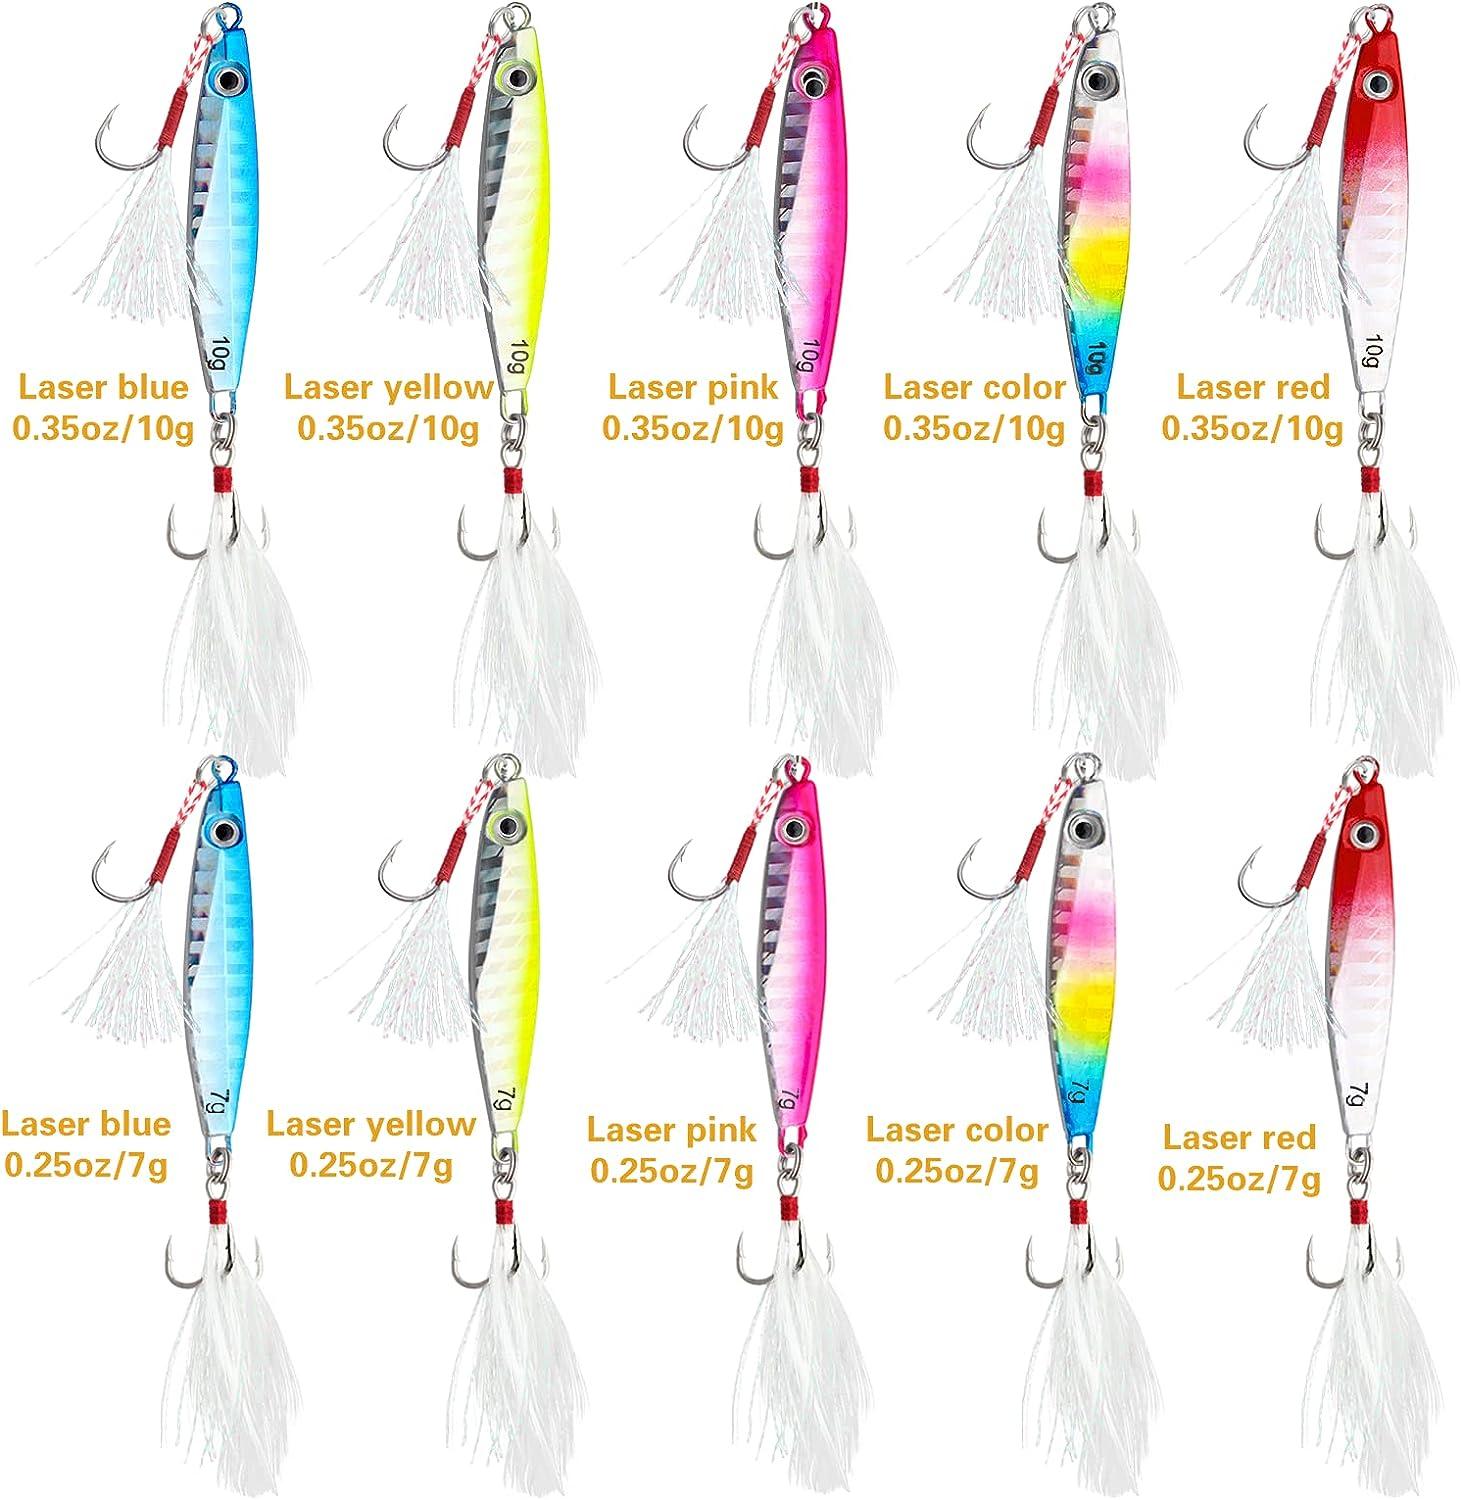 7g-20g Fake Fishing Lures With Hooks Vivid 3d Eyes Fishing Jigs With  Natural Feathers For Freshwater Seawater 